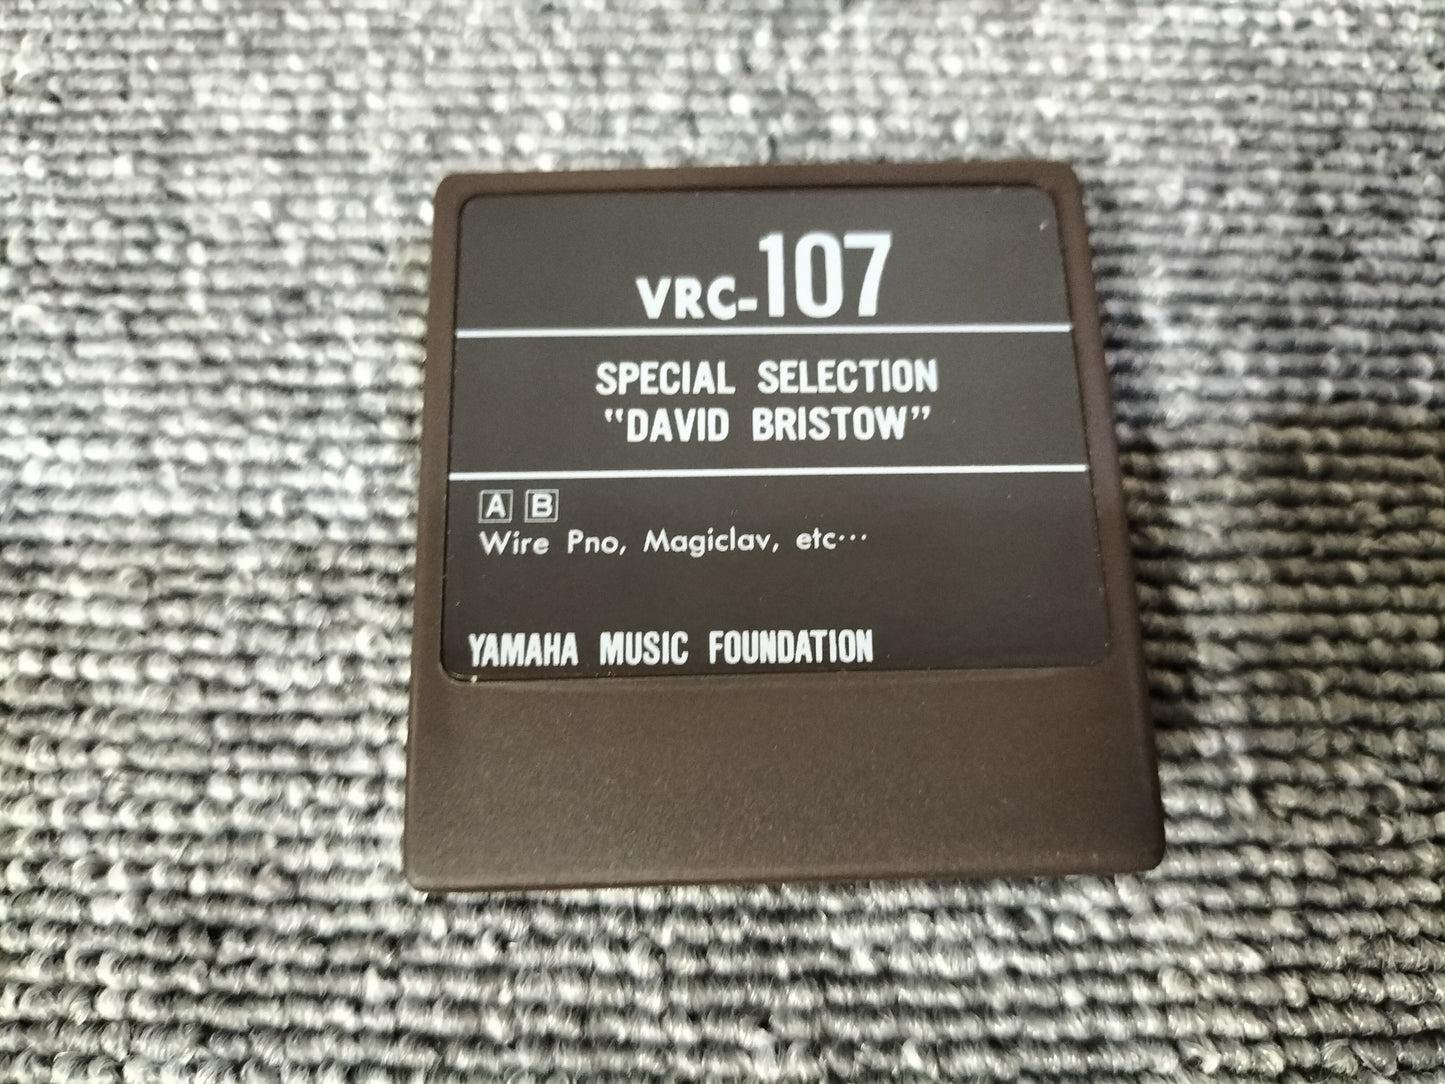 DX7カートリッジ　VoiceROM 107　SPECIAL SELECT“DAVID BRISTOW”　DX7用音源　ケース付き　O22071706